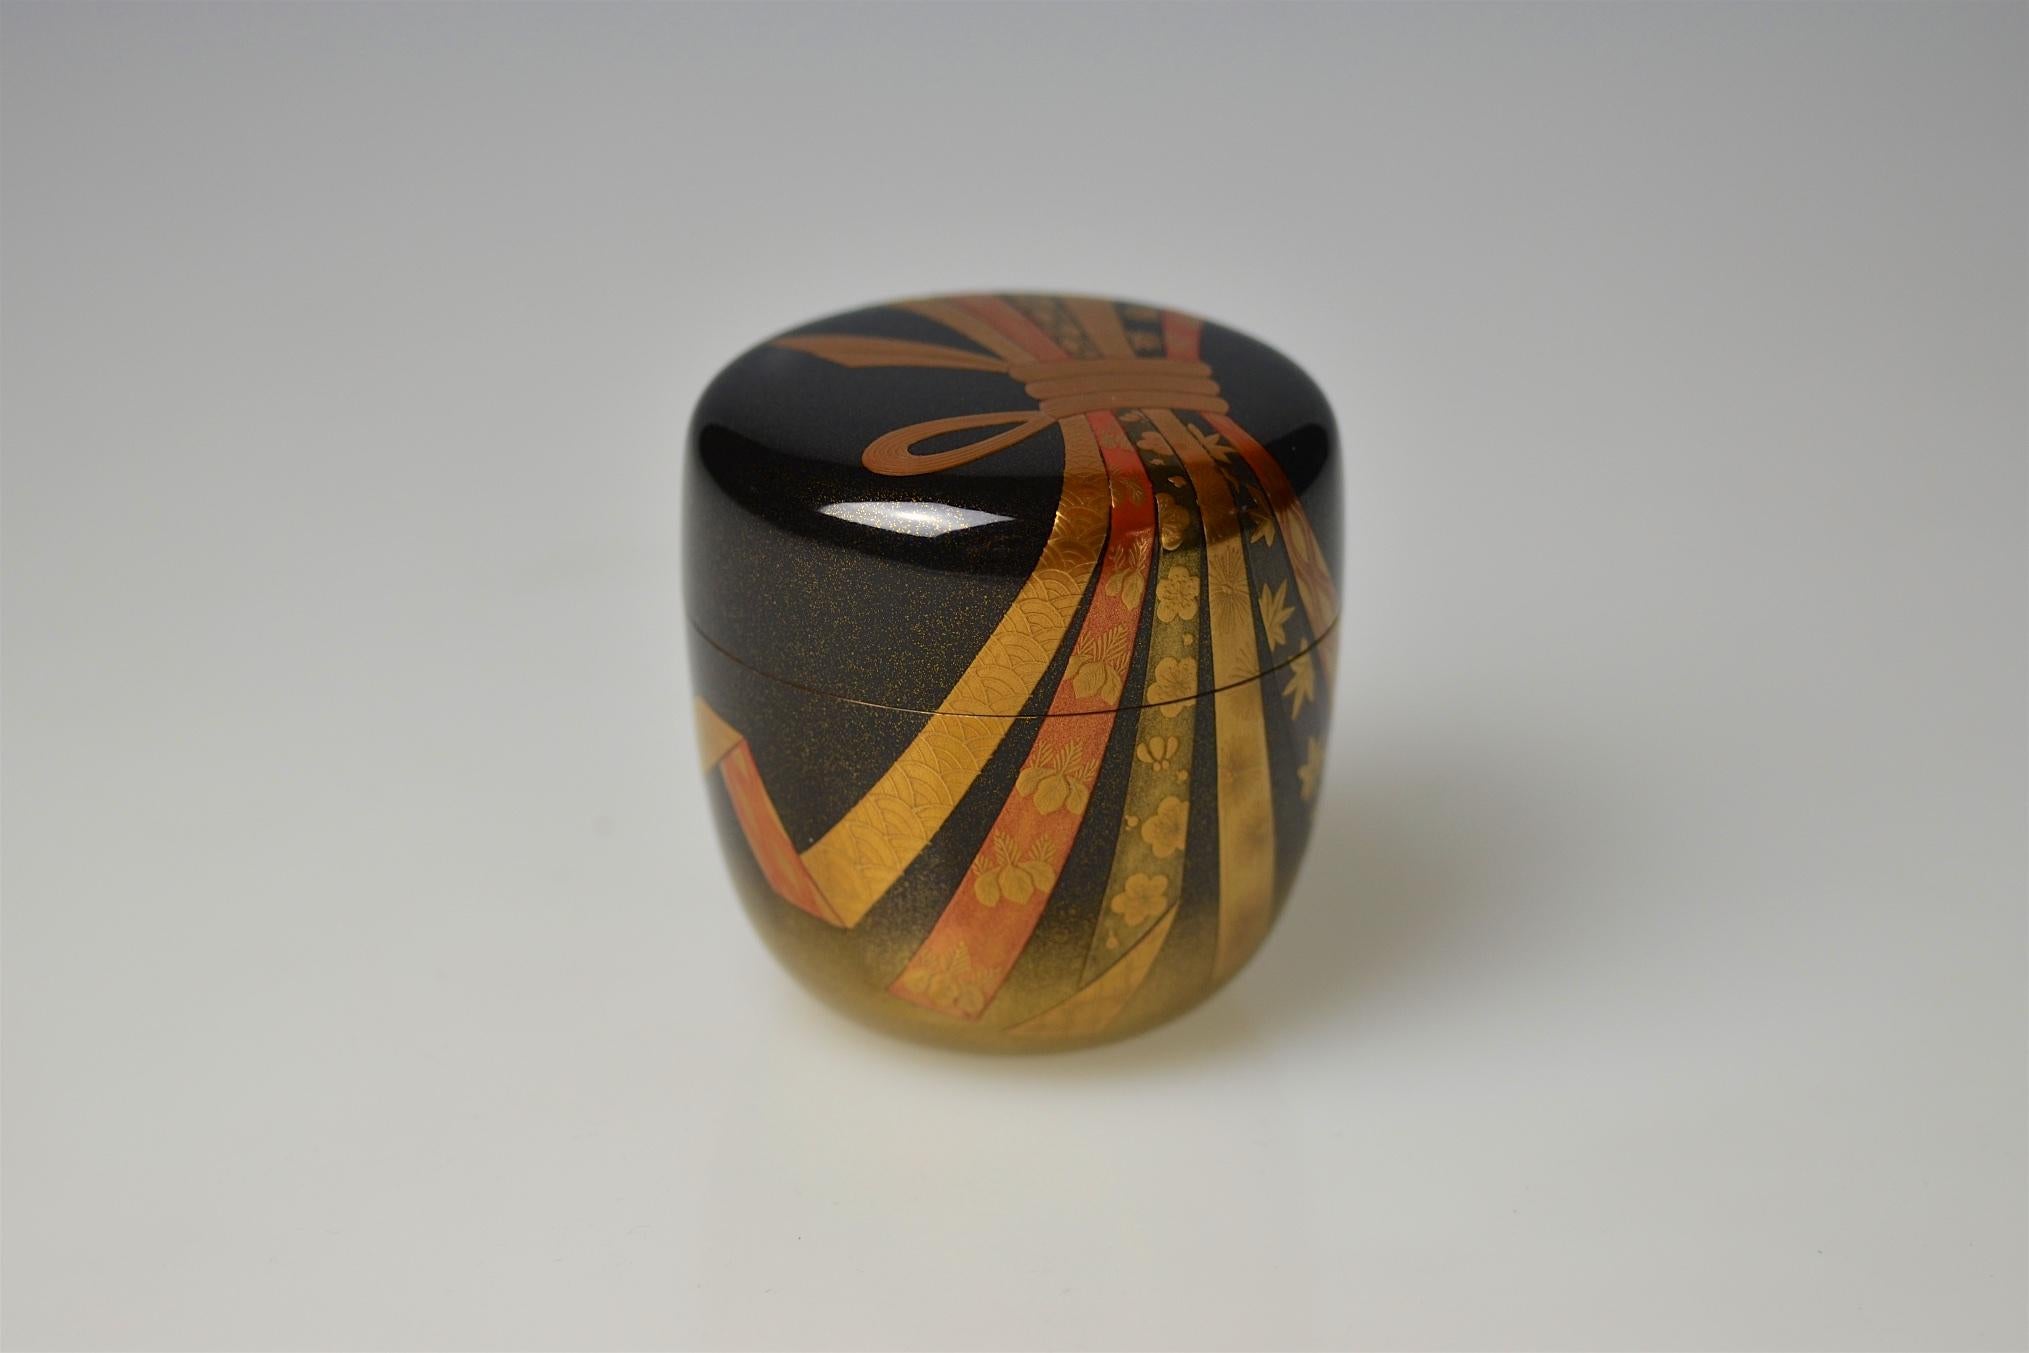 A large tea caddy (ô-natsume) made by Ichigo Itcho (1898-1991) with decor of festive ribbons that are hold together by a golden knot (noshi). The wood body is finished in polished black lacquer (roiro) and sprinkled with gold powder in the lower